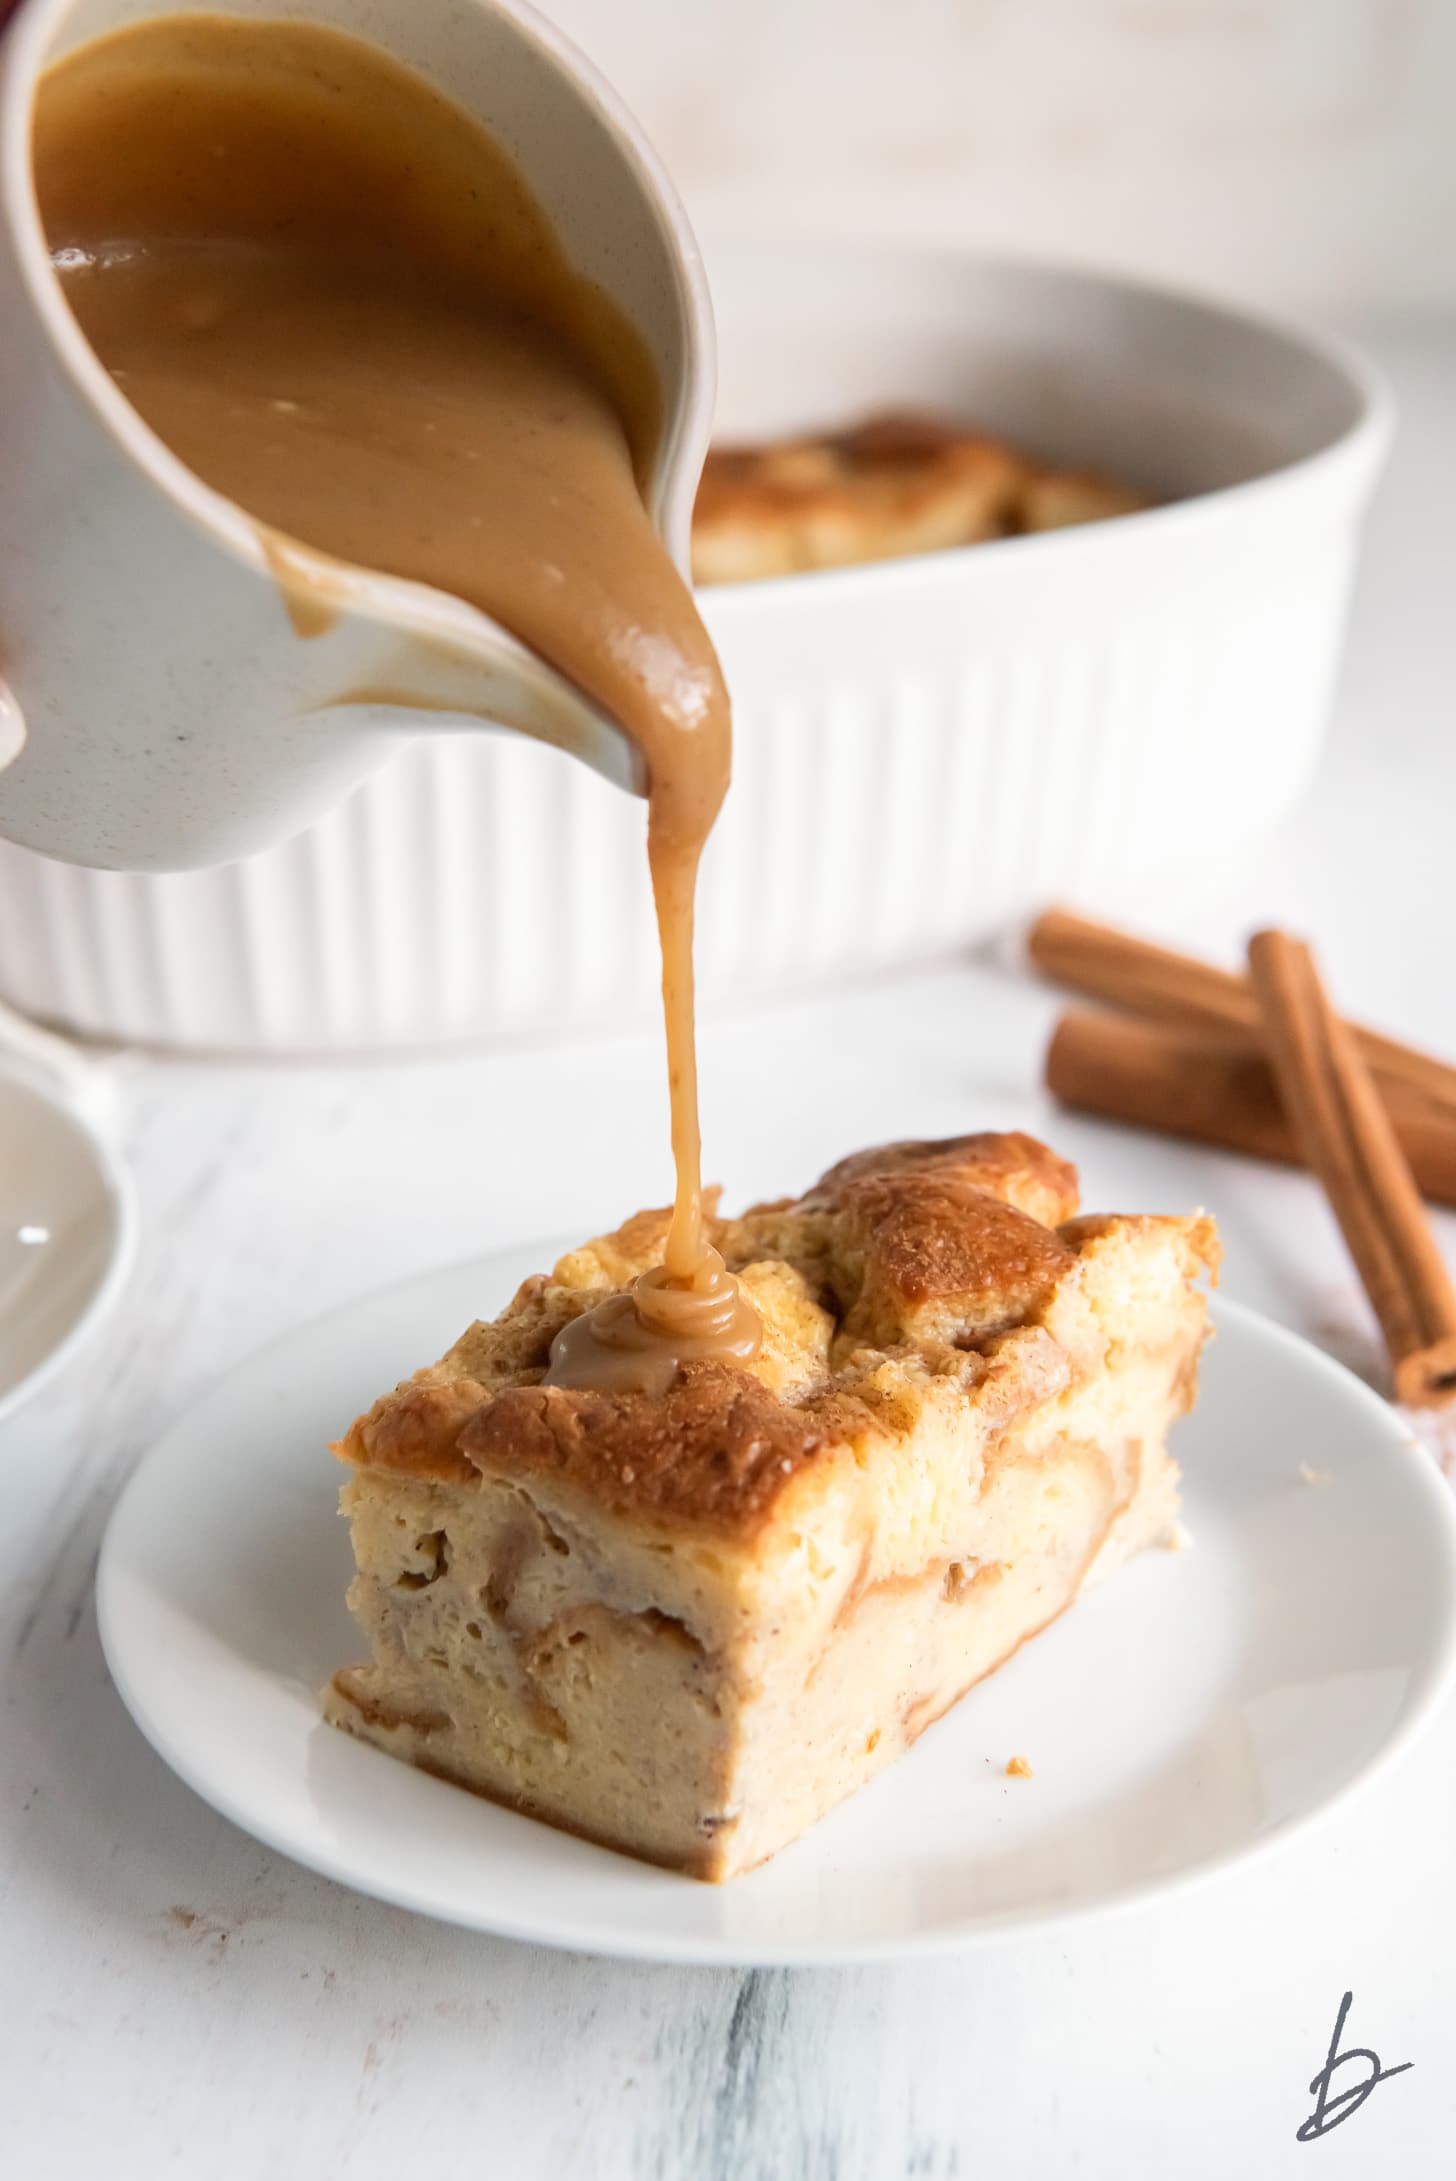 bourbon sauce being poured out of small pitcher onto piece of bread pudding on a plate